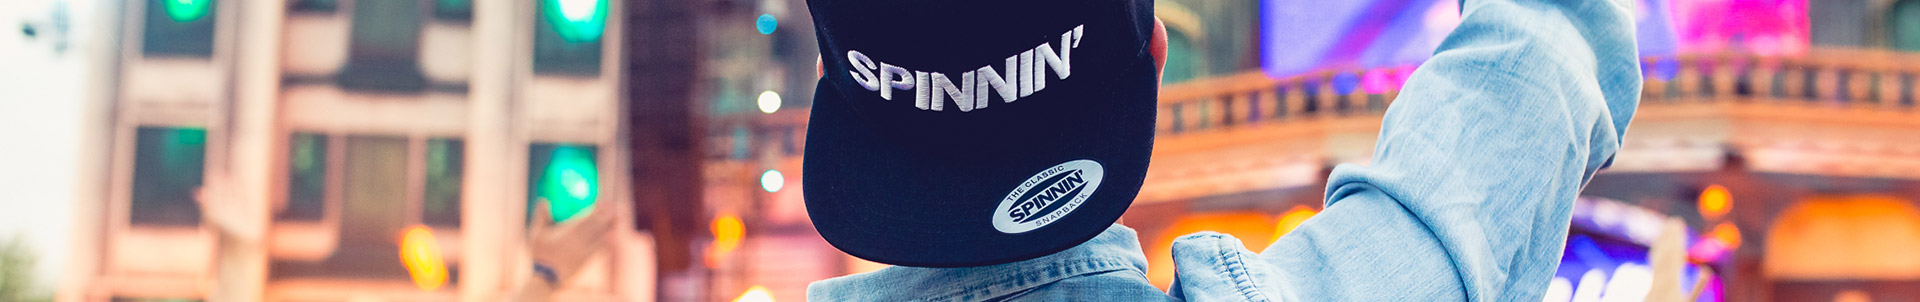 Spinnin' Records is looking for you!